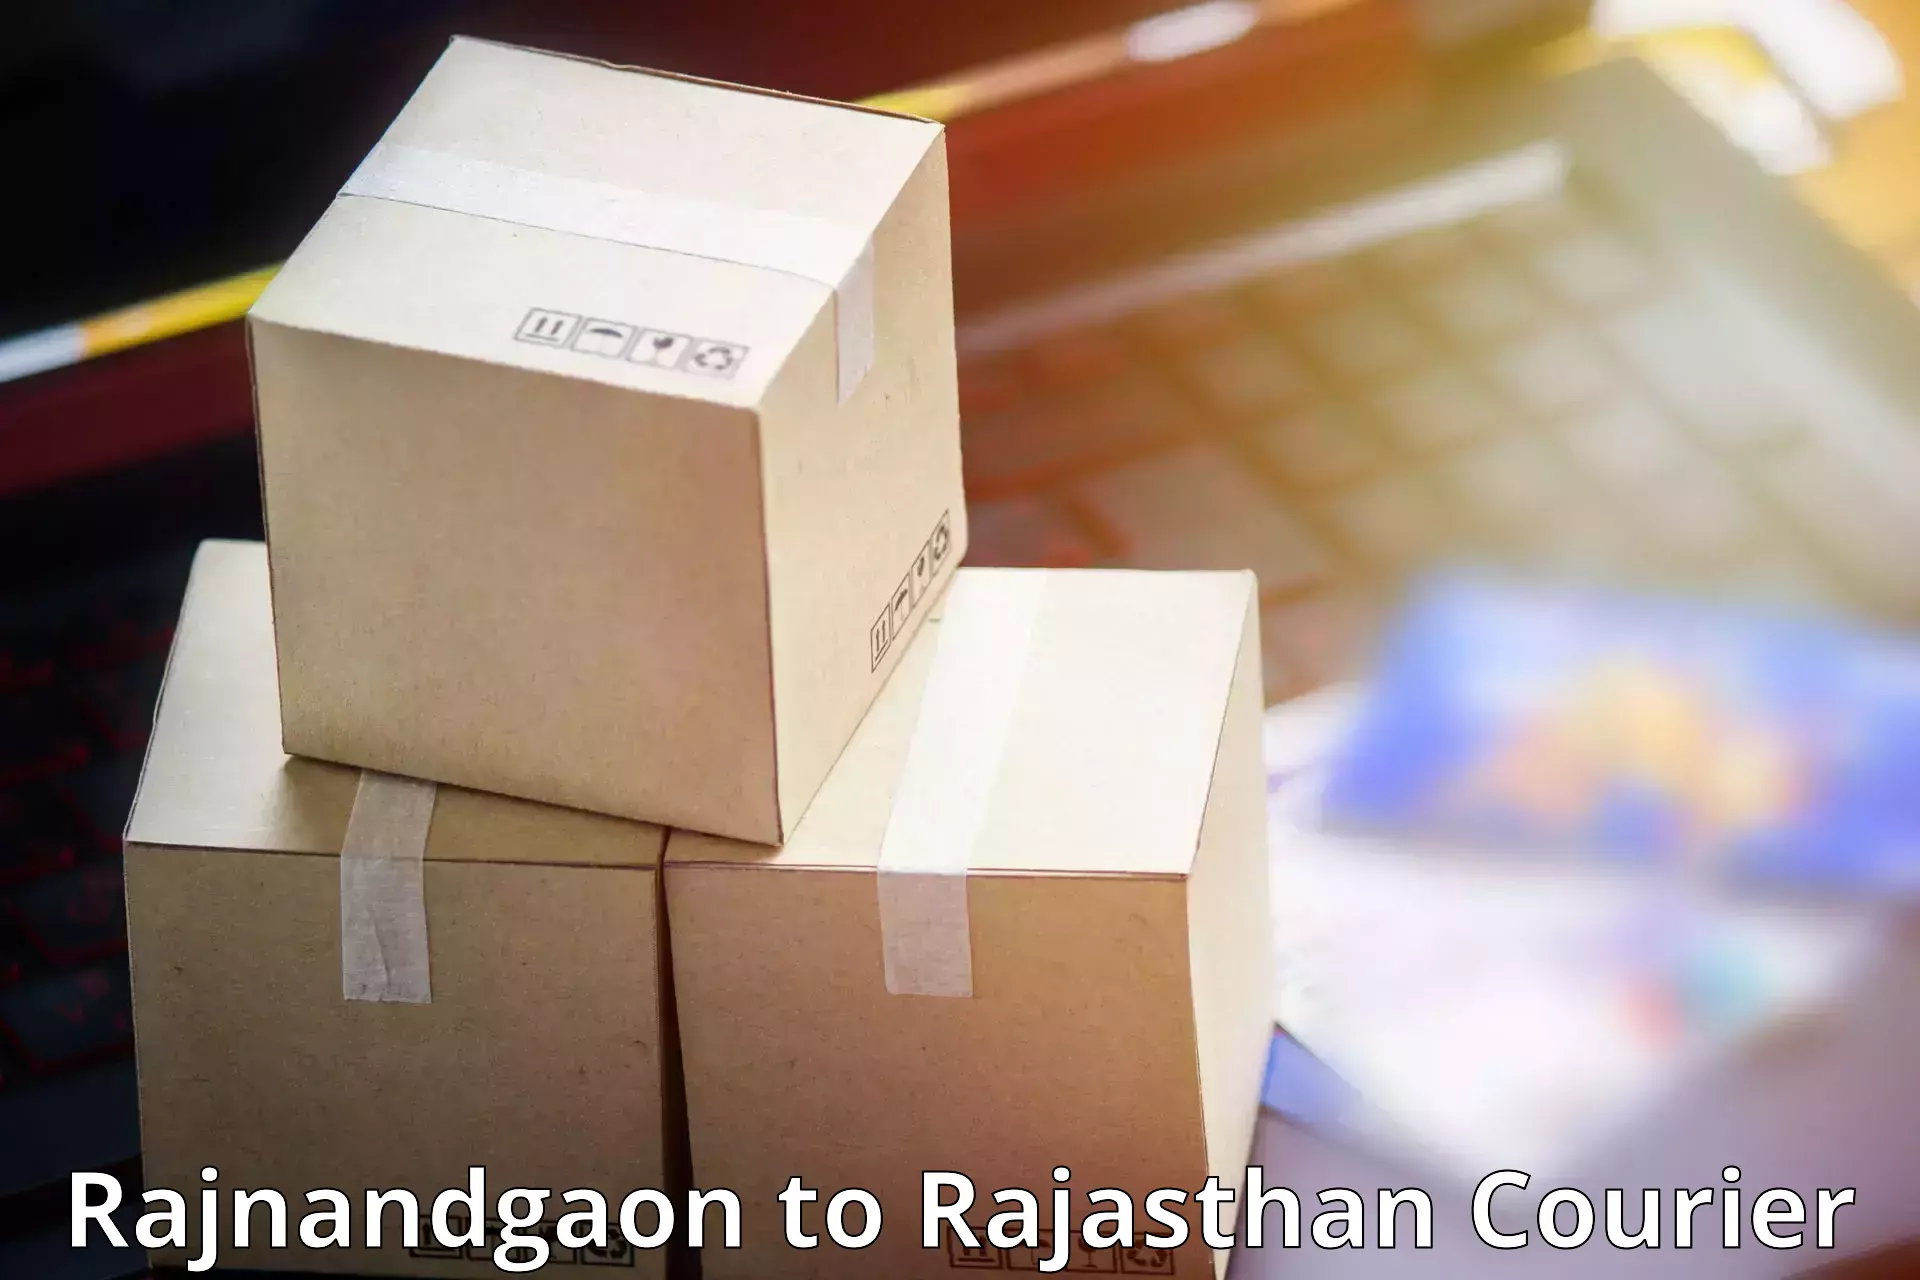 Parcel service for businesses Rajnandgaon to Beawar